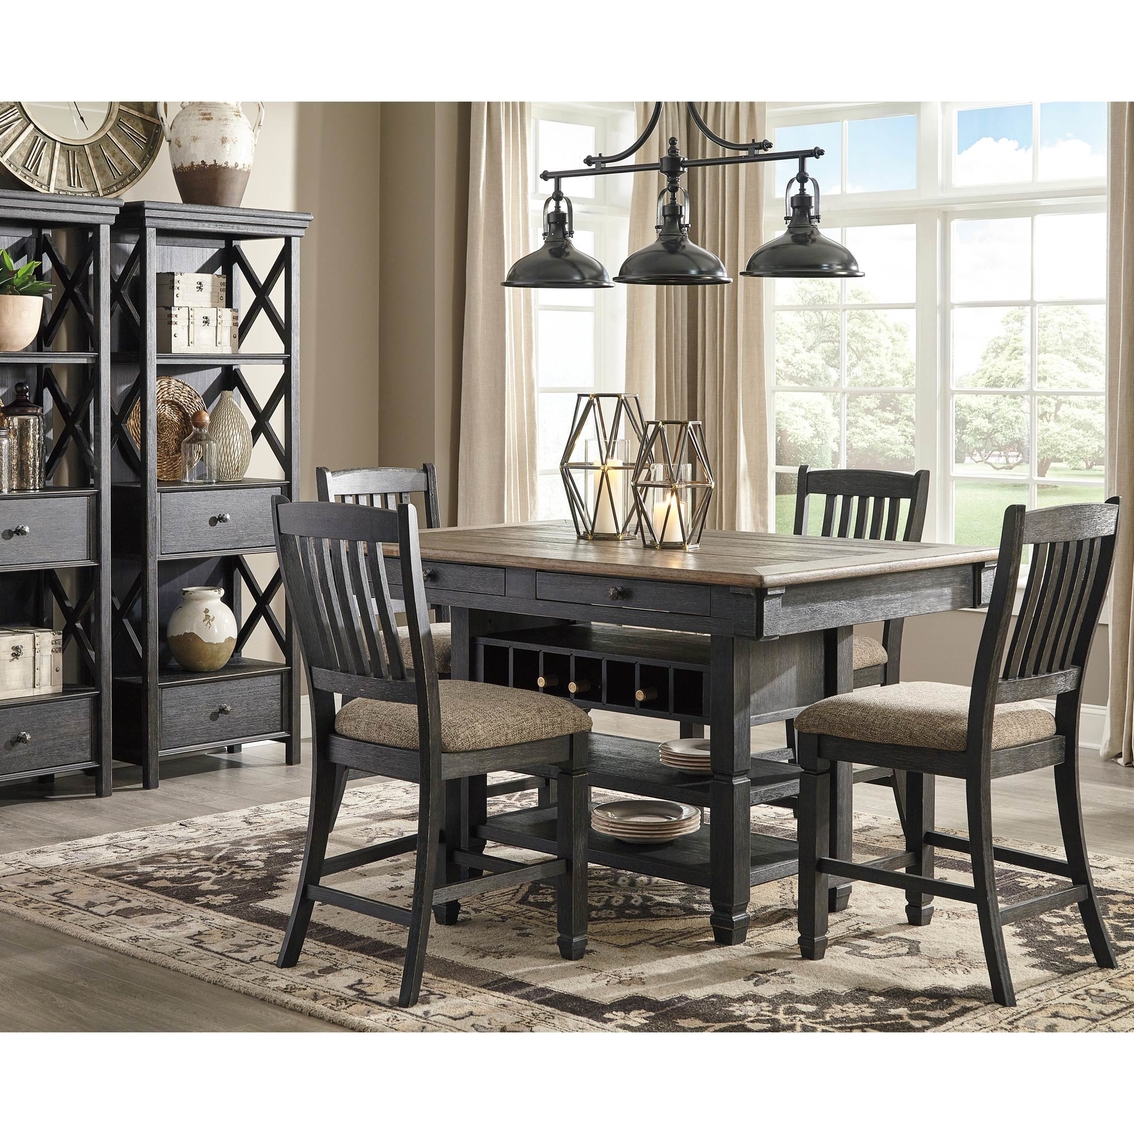 Signature Design by Ashley Tyler Creek 5 Pc. Counter Height Dining Table Set - Image 2 of 2